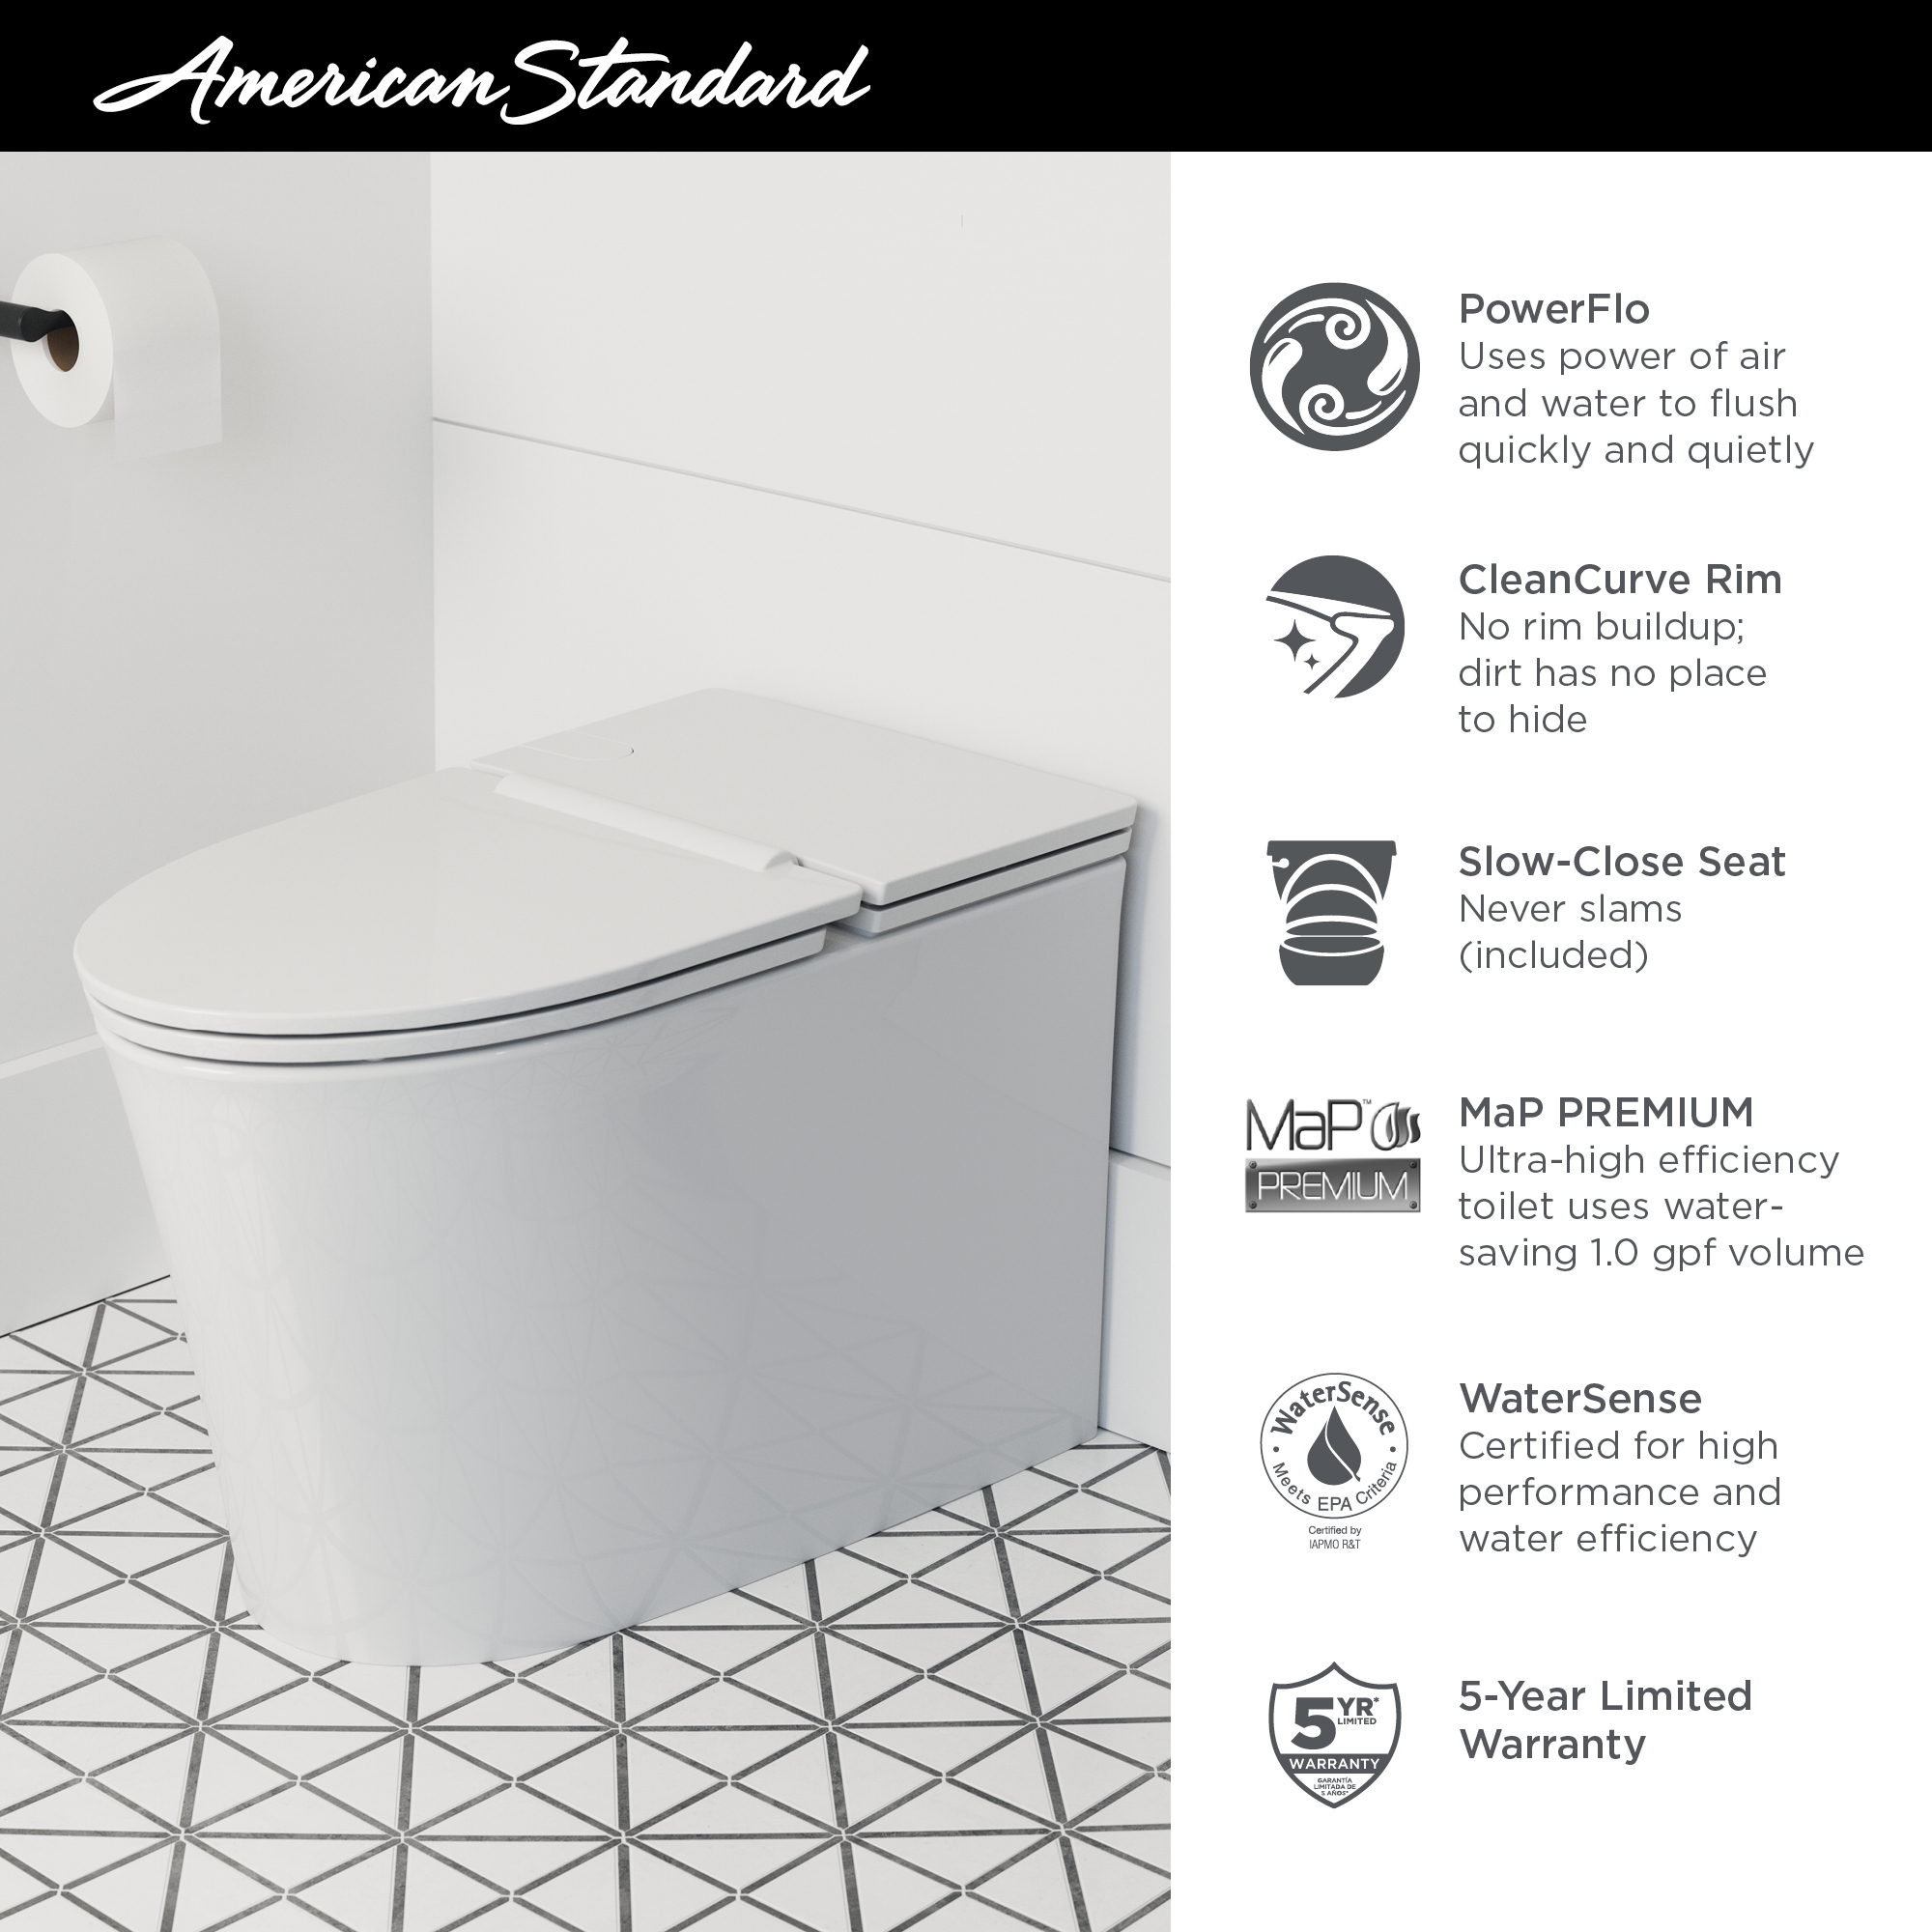 American Standard Studio S 1-piece 1.0 GPF White Elongated Low-Profile Toilet, Seat Included - image 6 of 14